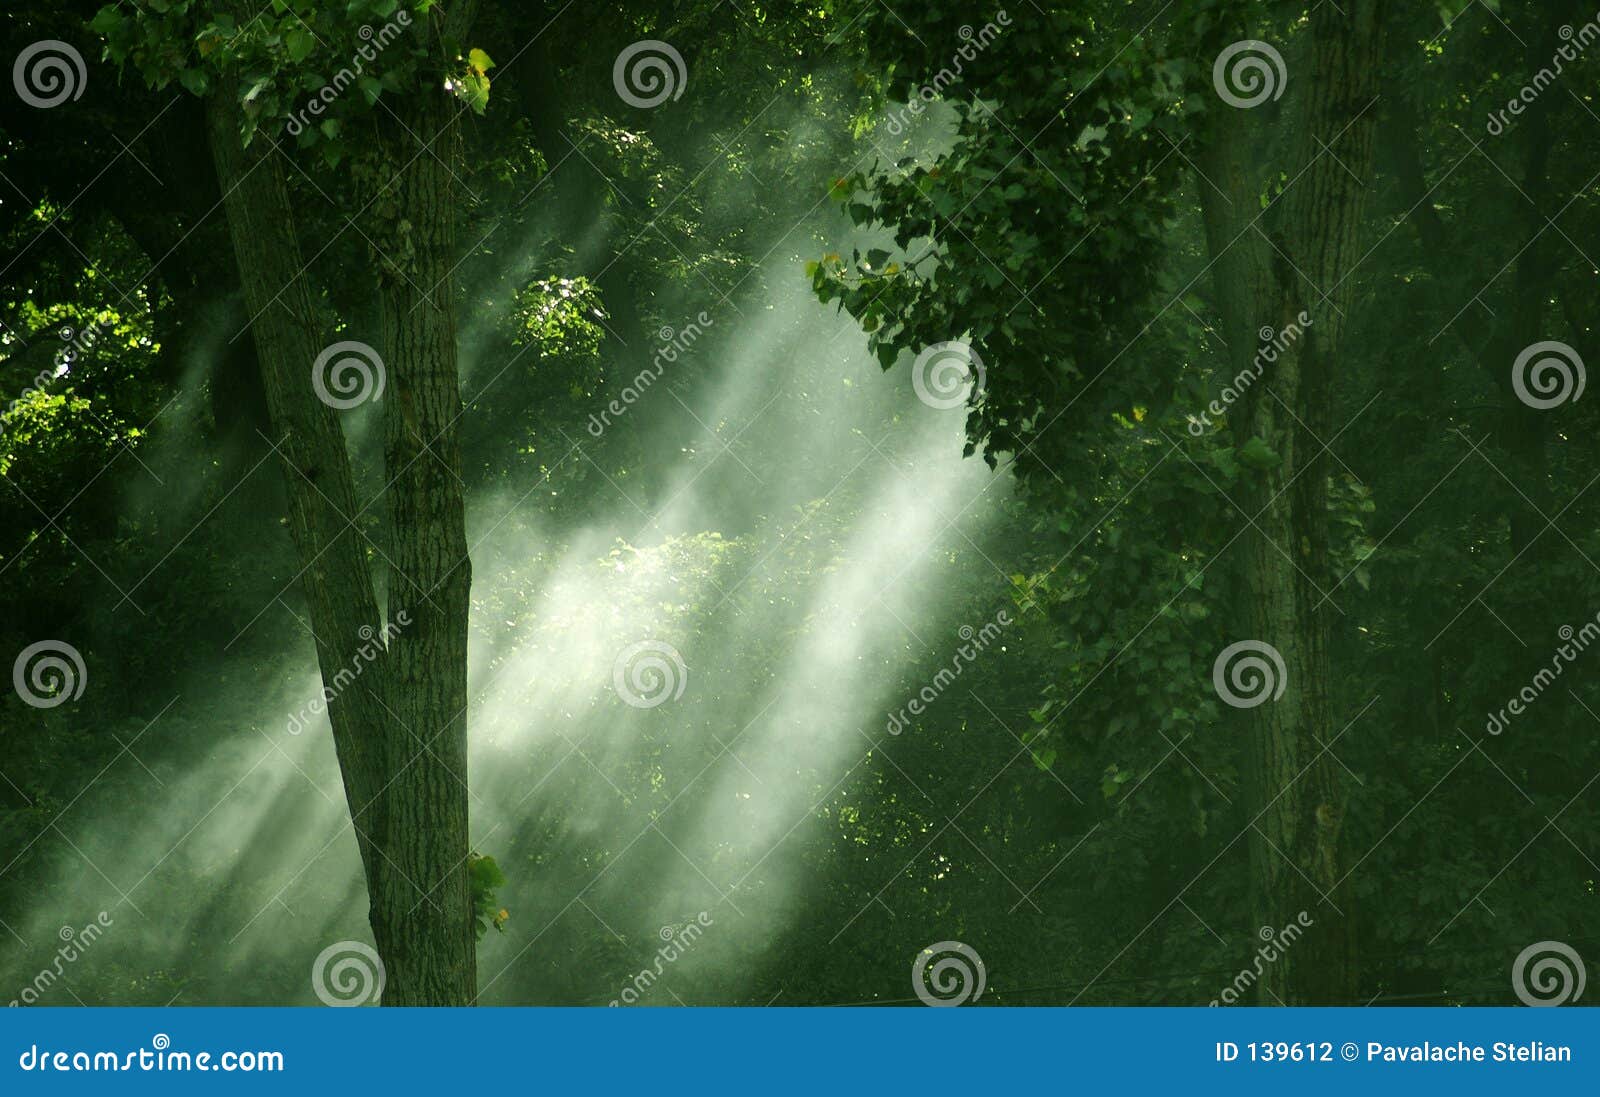 Streaming Light Through Forest Stock Photo Image Of Misty Green 139612